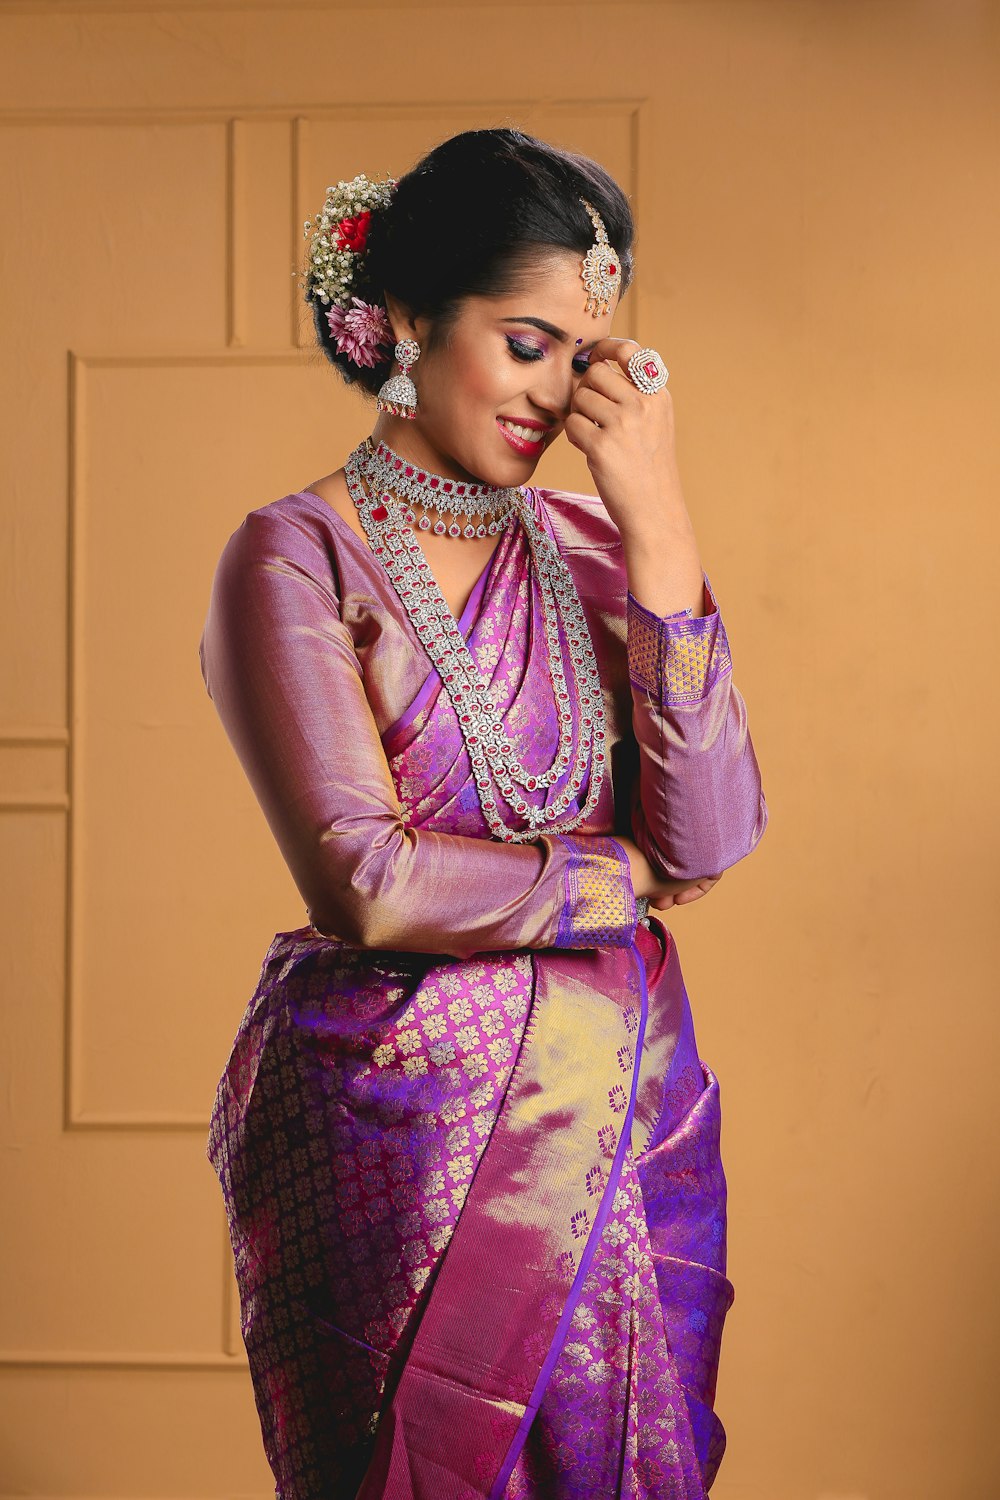 a woman in a purple and gold sari